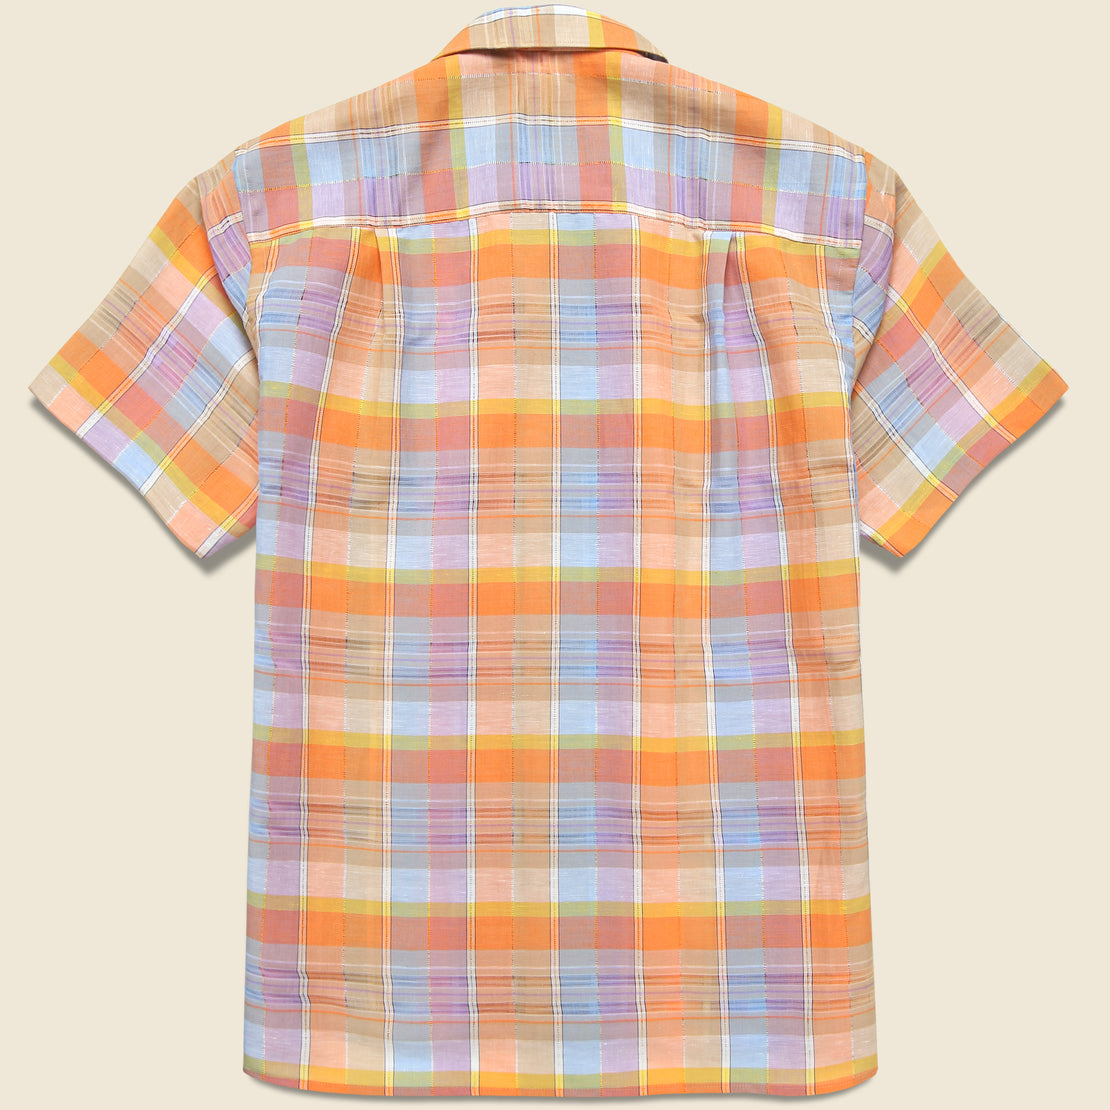 Ghost Weave Camp Shirt - Orange - Gitman Vintage - STAG Provisions - Tops - S/S Woven - Plaid